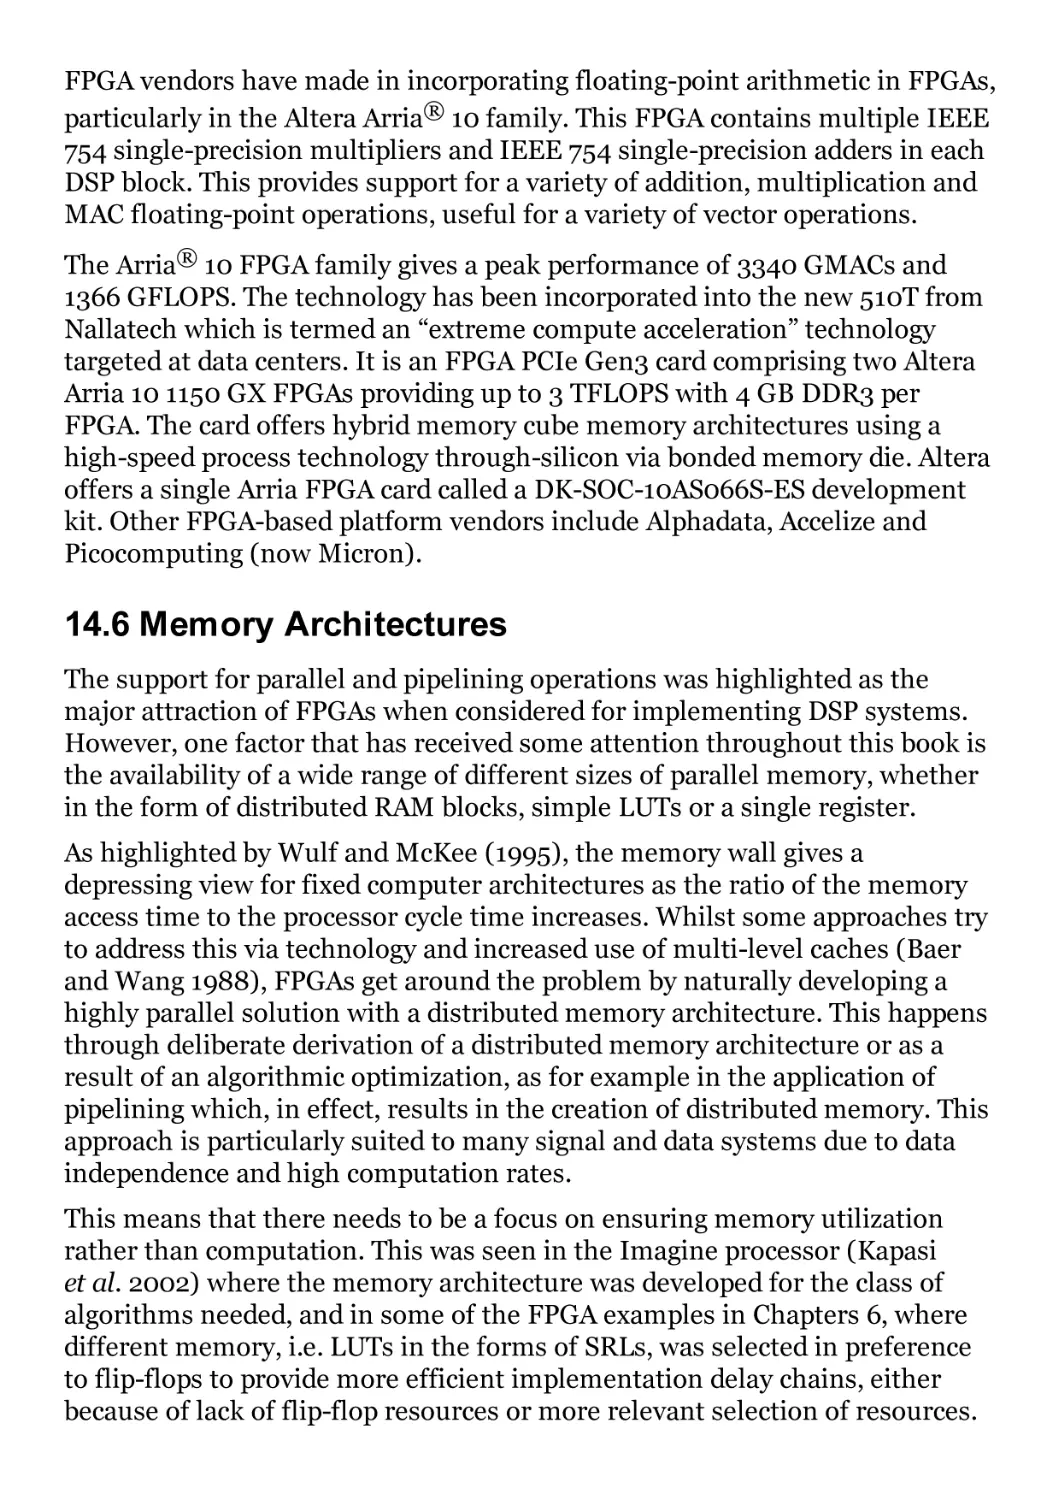 14.6 Memory Architectures